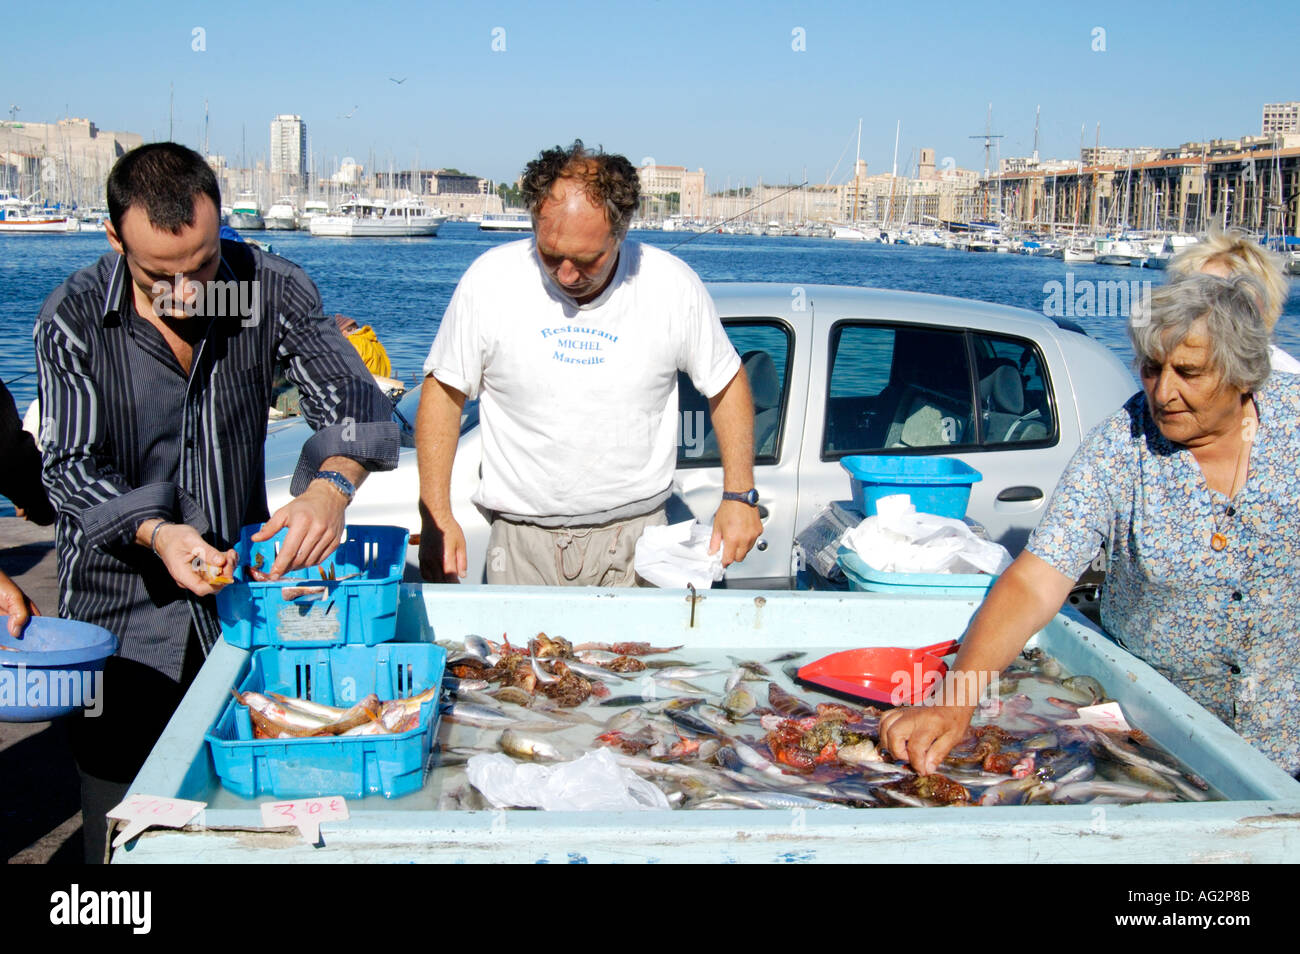 France Marseille Le Vieux Port Owner of bouillabaisse restaurant Miramar Christian Buffa on left picking fish in the morning Stock Photo